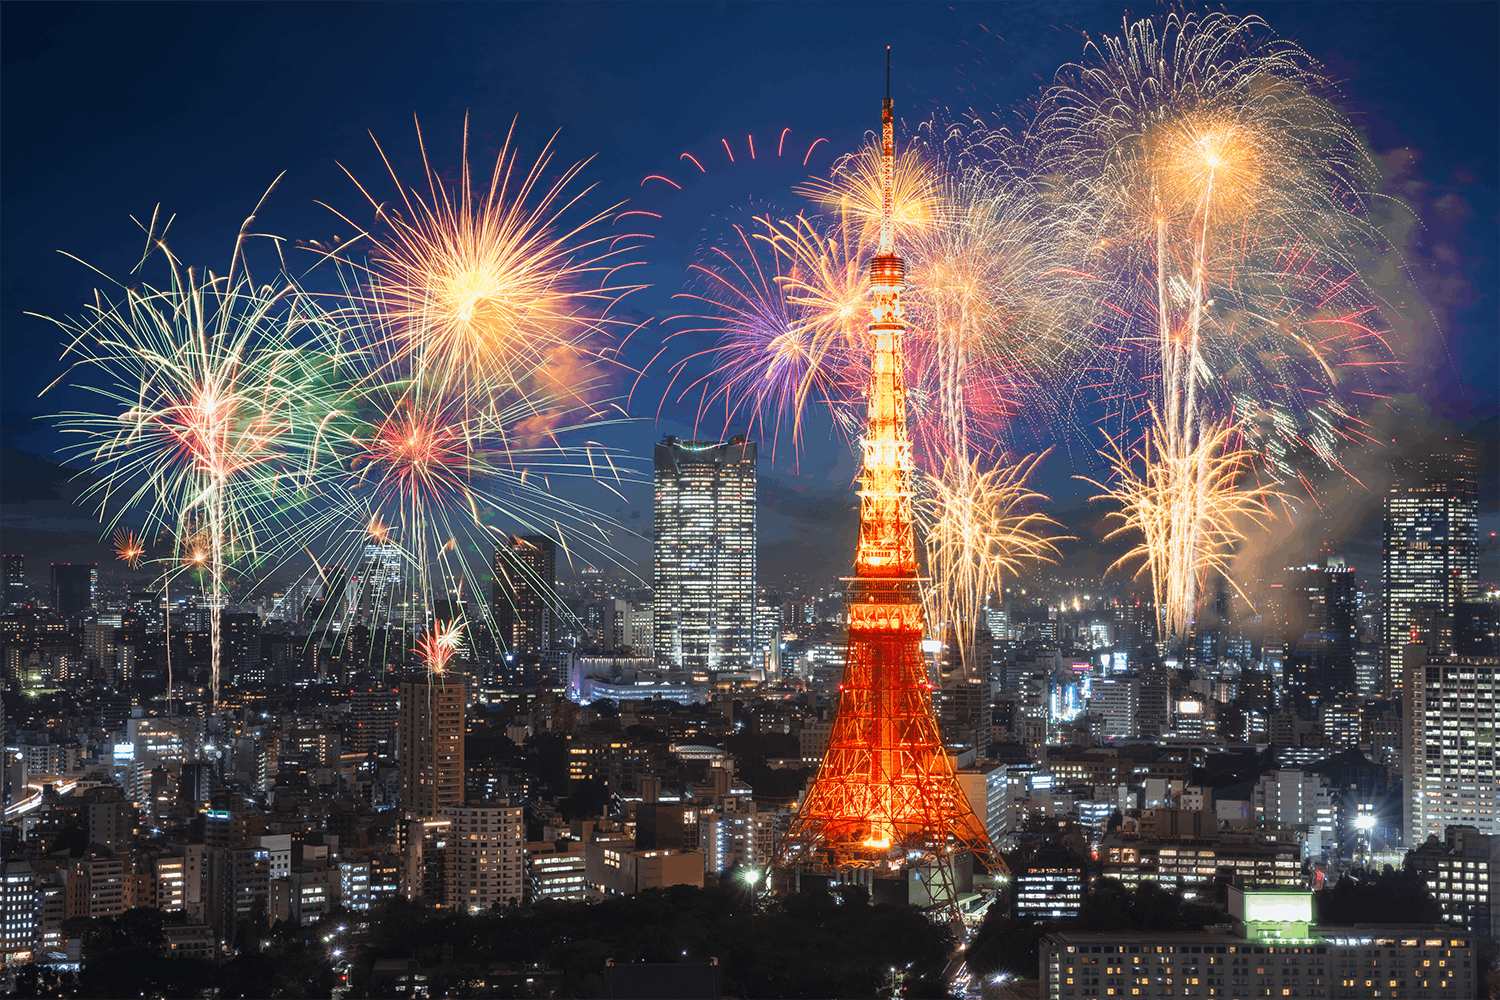 The red Tokyo Tower is pictured surrounded by skyscrapers and fireworks lighting up a night sky.